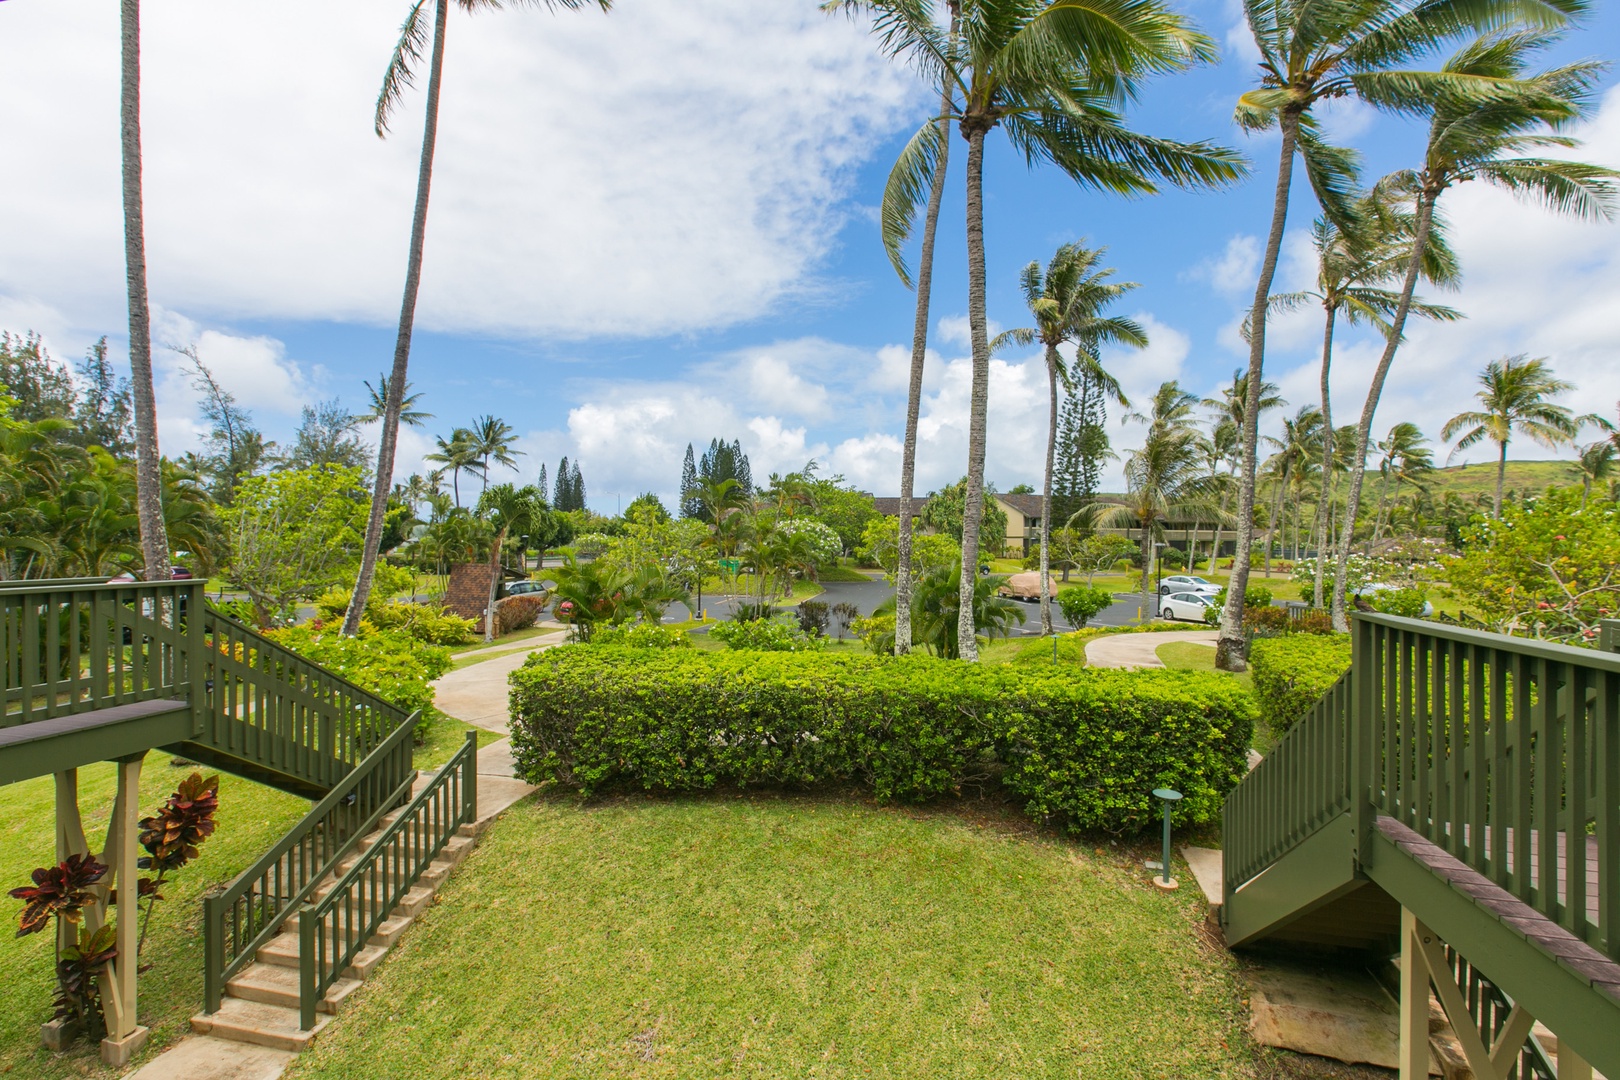 Kahuku Vacation Rentals, Ilima West Kuilima Estates #18 at Turtle Bay - Savor the tranquil garden vistas from the sanctuary of the main bedroom, a nature-lover's delight.